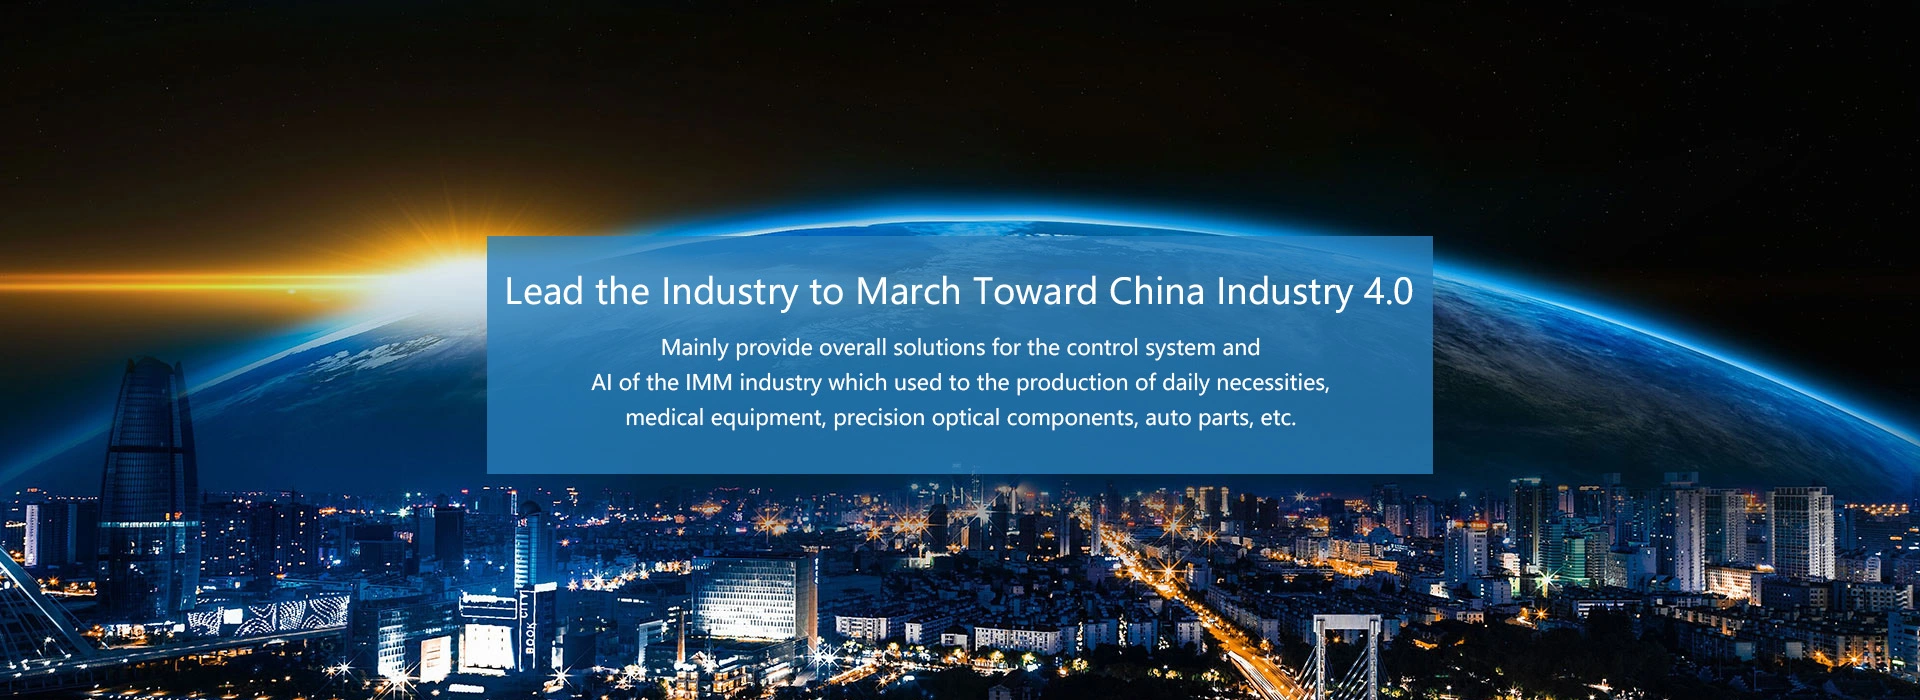 Lead the Industry to March Toward China Industry 4.0